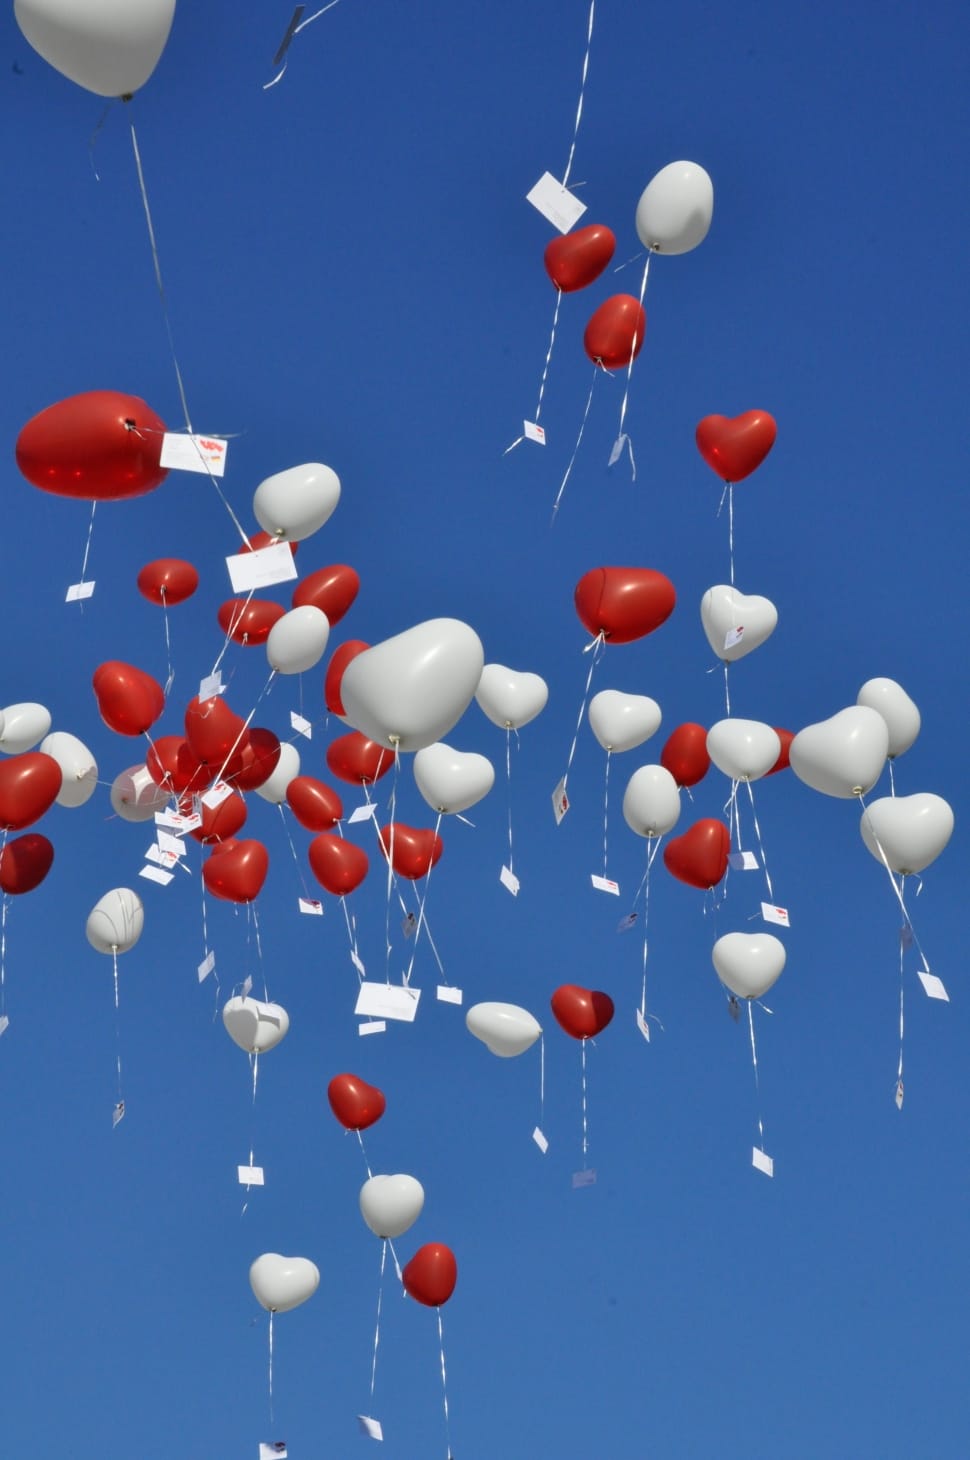 white and heart shaped balloons flew in daytime preview